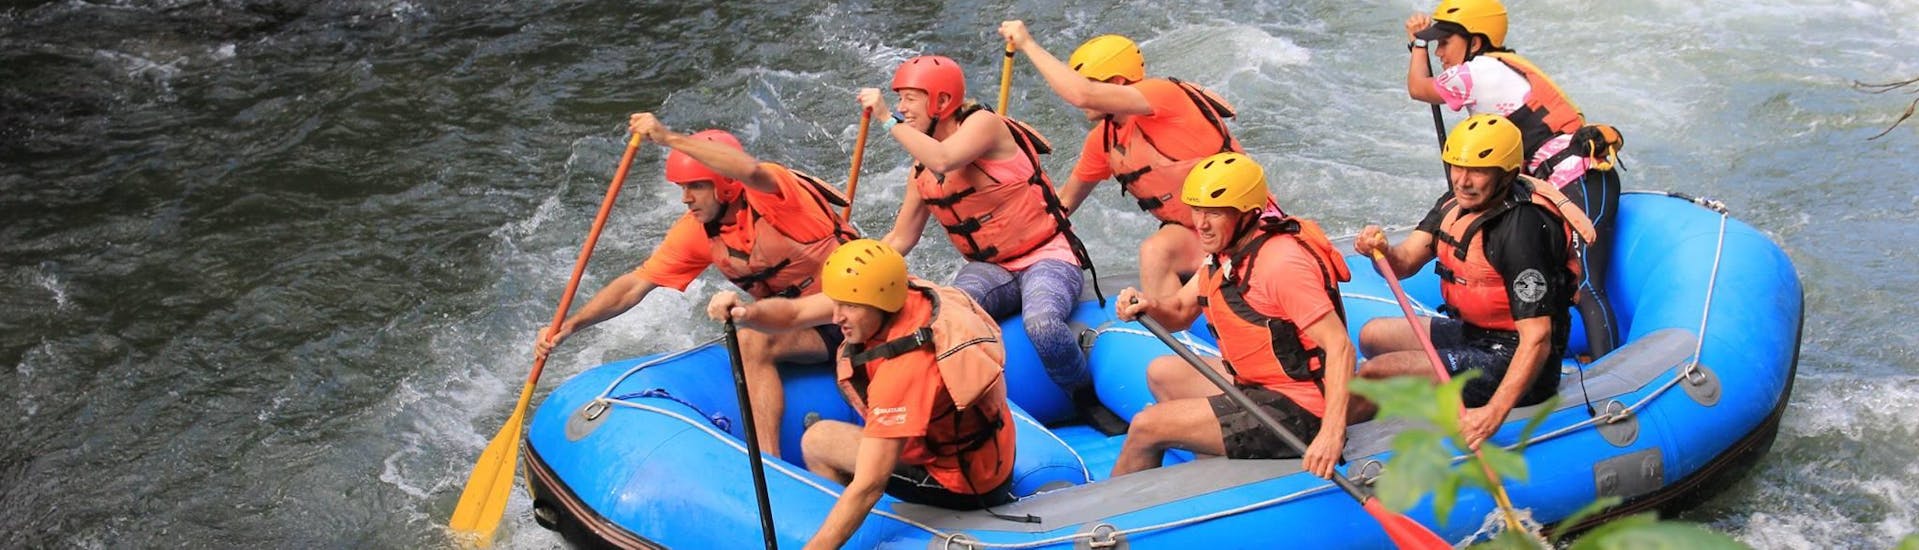 During Rangitaiki River Rafting in Murupara with Rafting Adventure Rotorua, the participants are paddling together in order to overcome any obstacles on the river.